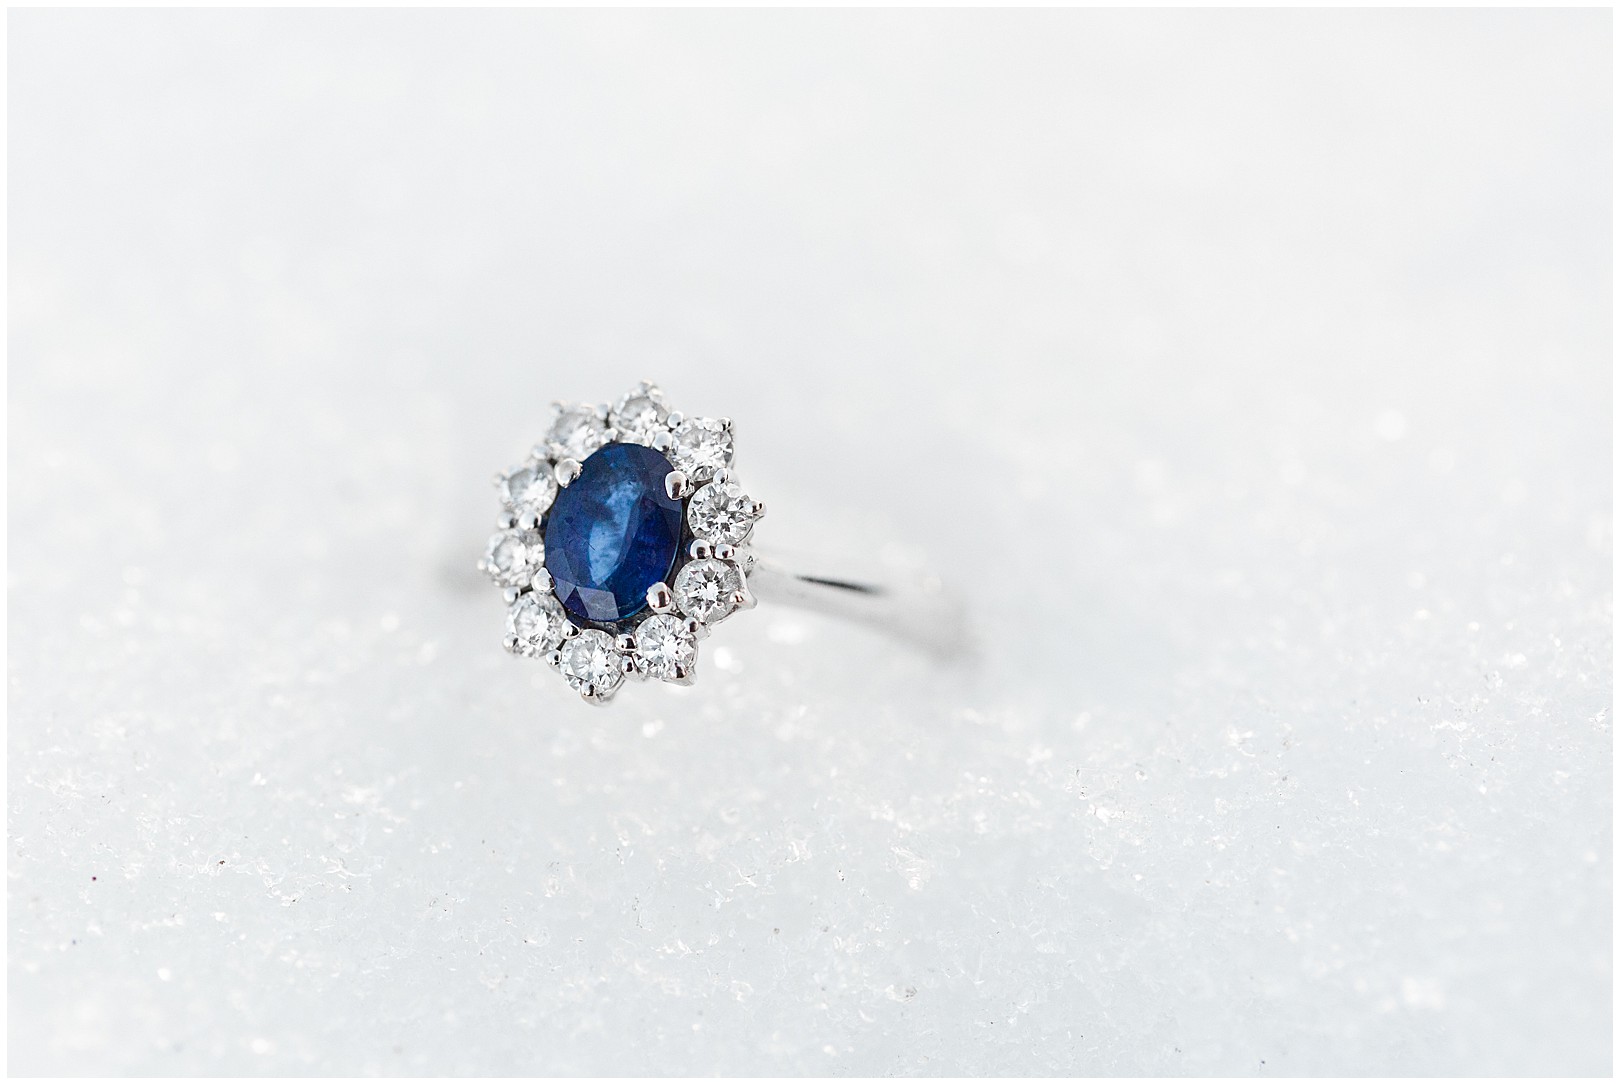 Sapphire engagement ring in snow